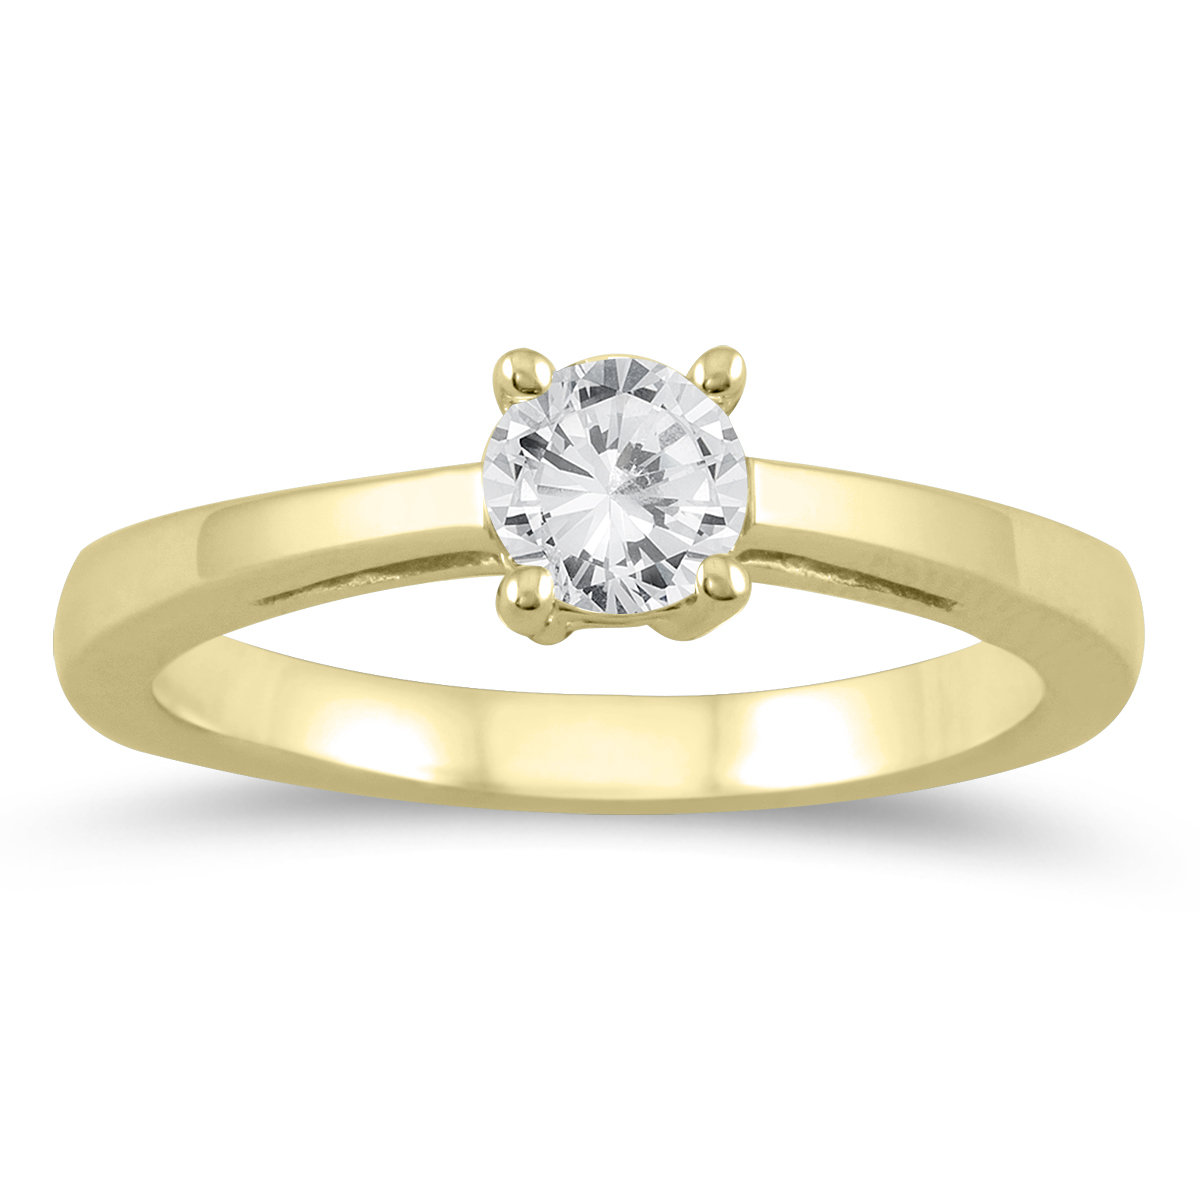 1/2 Carat Classic Diamond Solitaire Ring in 10K Yellow Gold